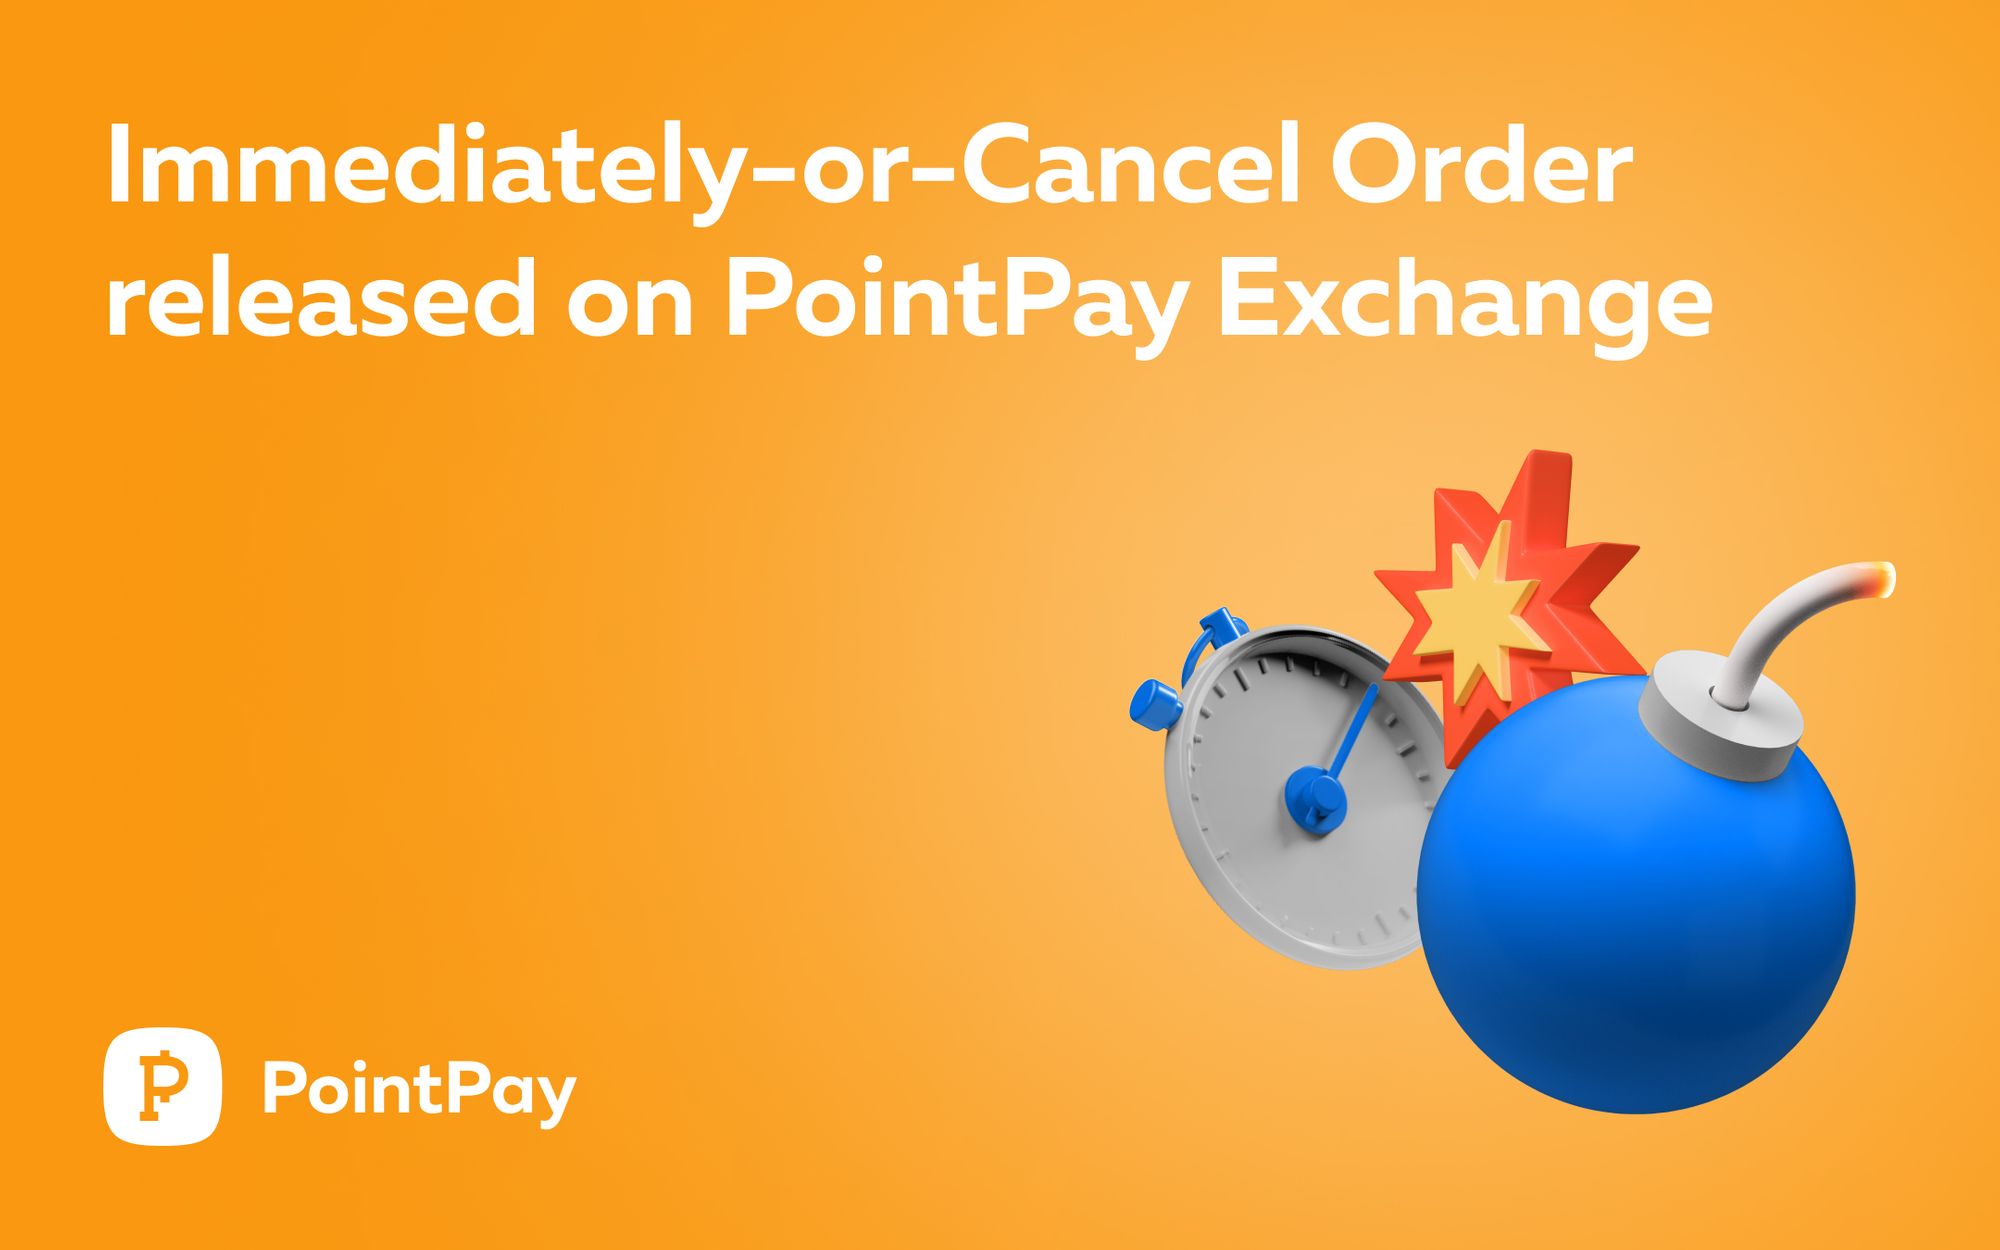 PointPay Introduces Immediately-or-Cancel Order Type